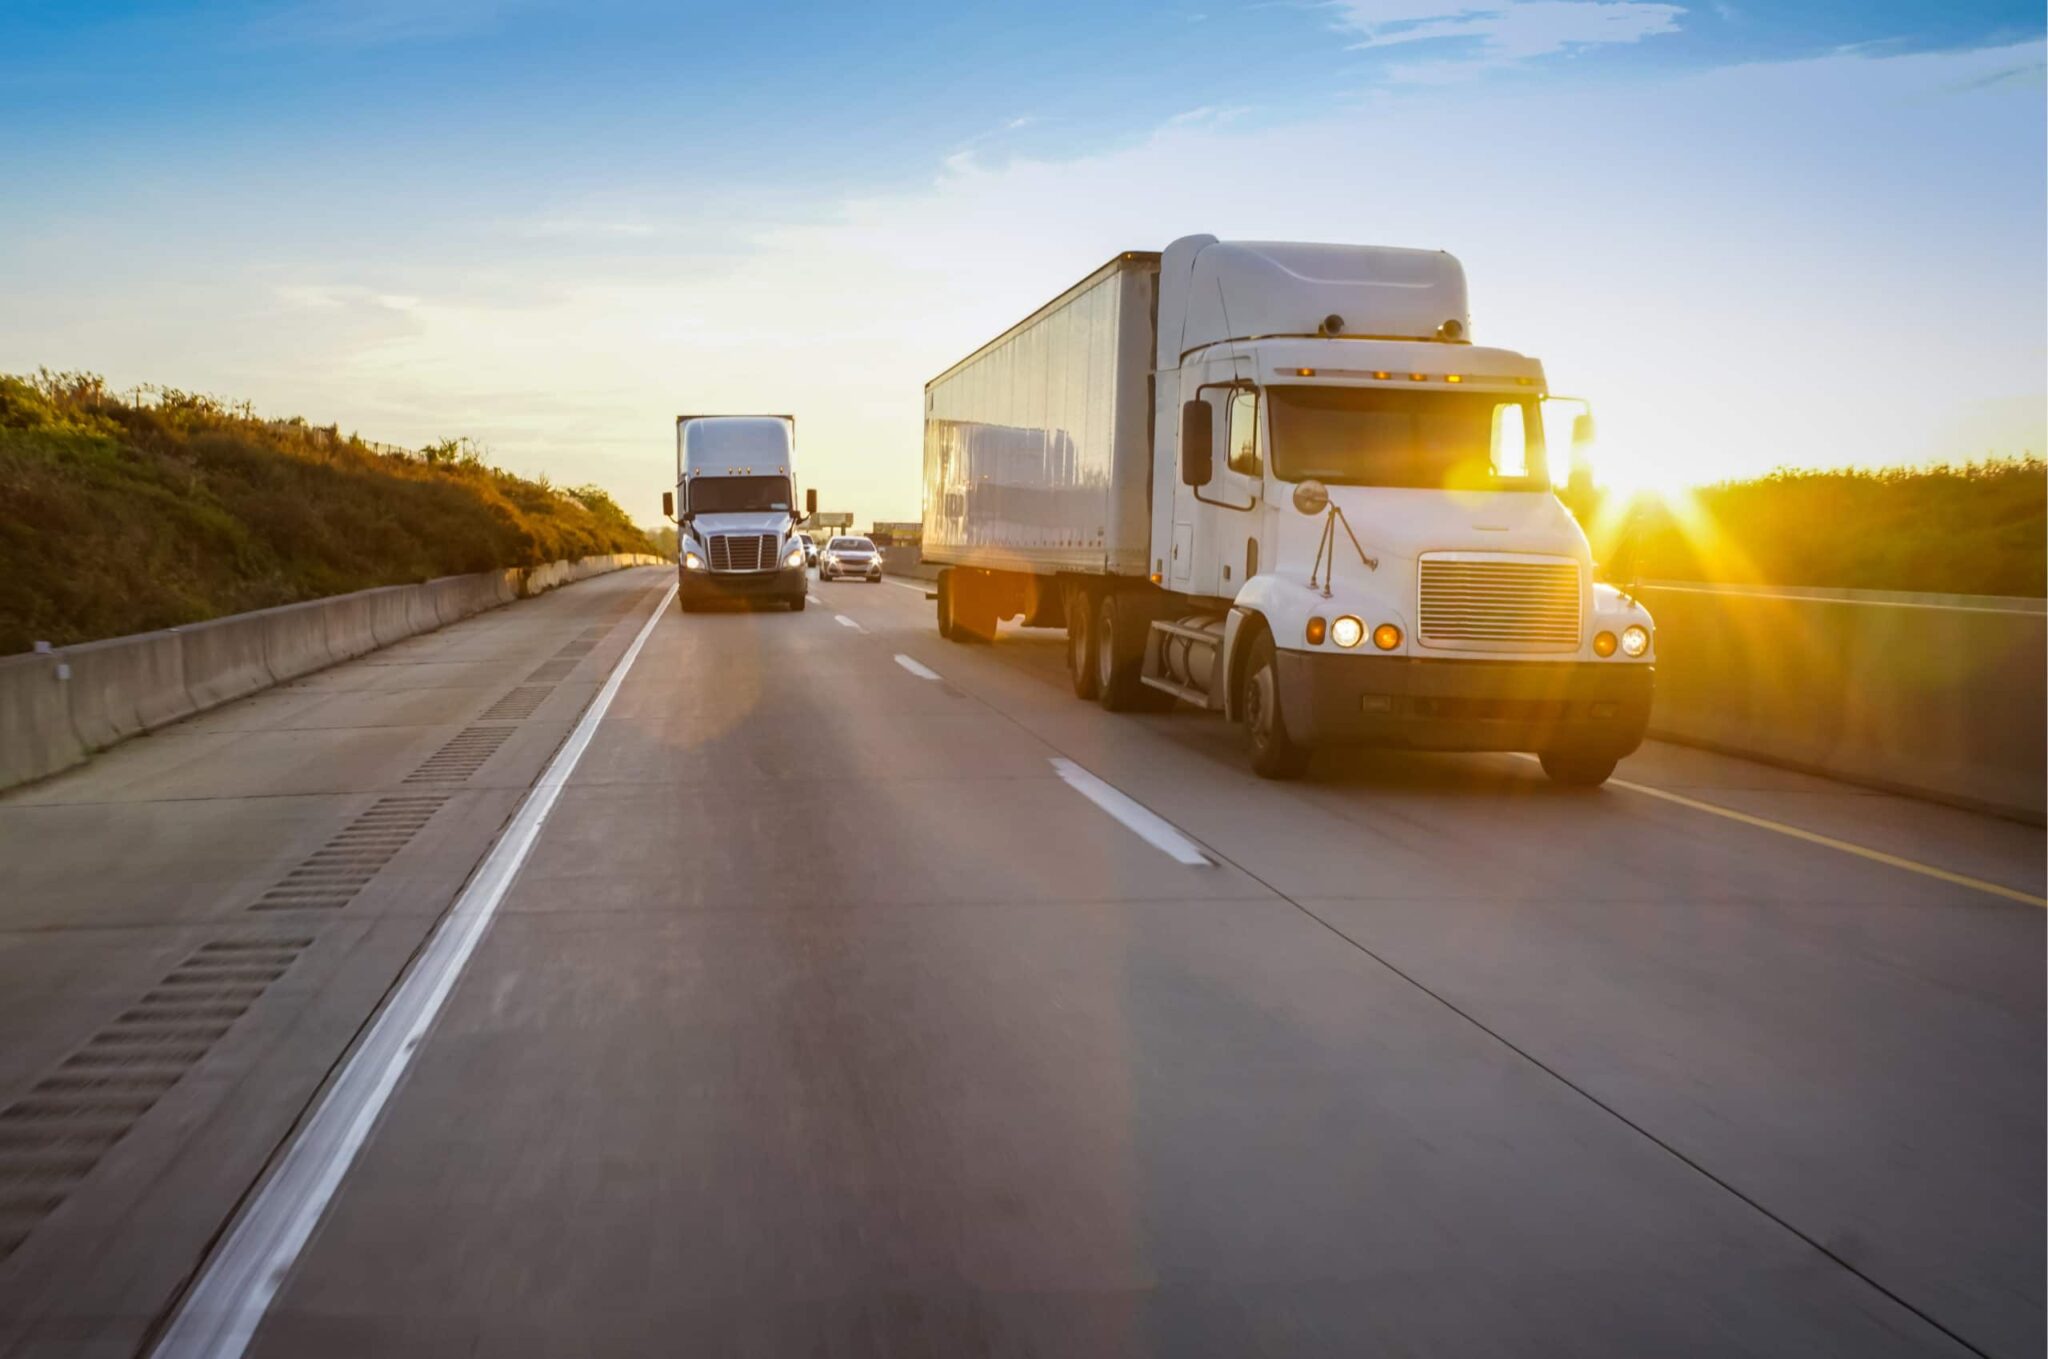 Will “Flexible” Trucking Rules Encourage Drowsy Driving?